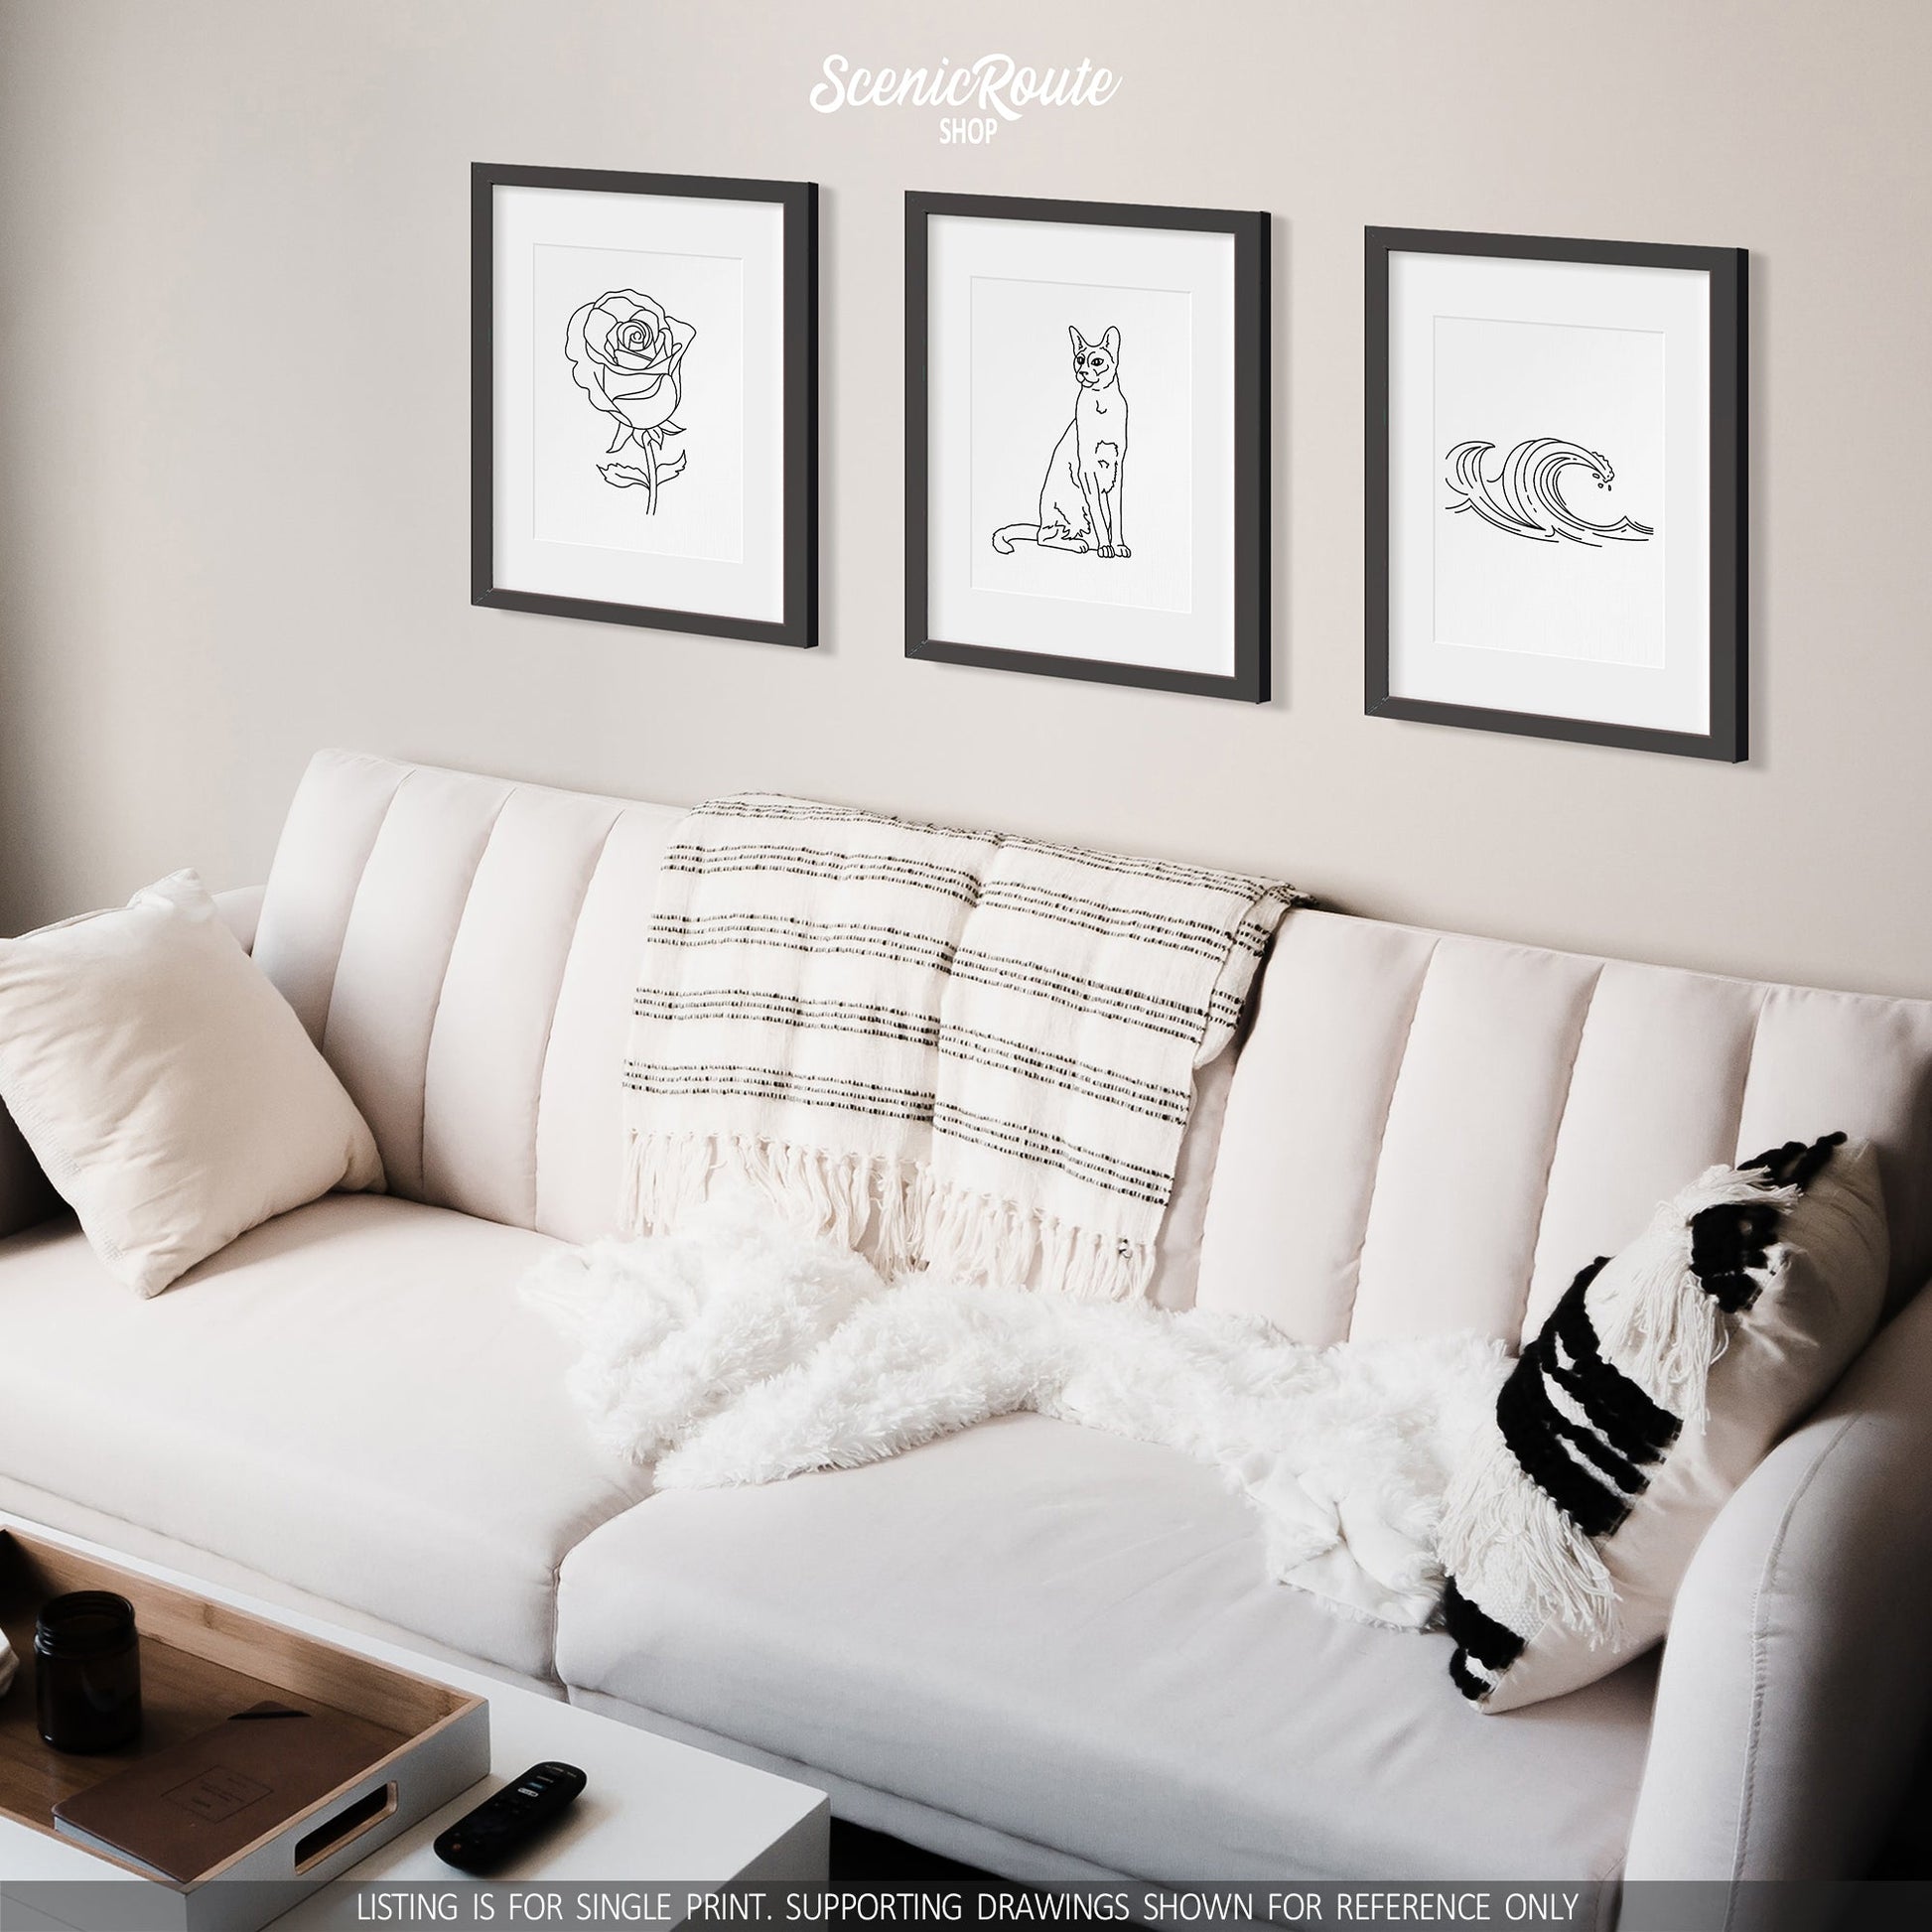 A group of three framed drawings on a wall above a couch. The line art drawings include a Rose Flower, Siamese cat, and Waves